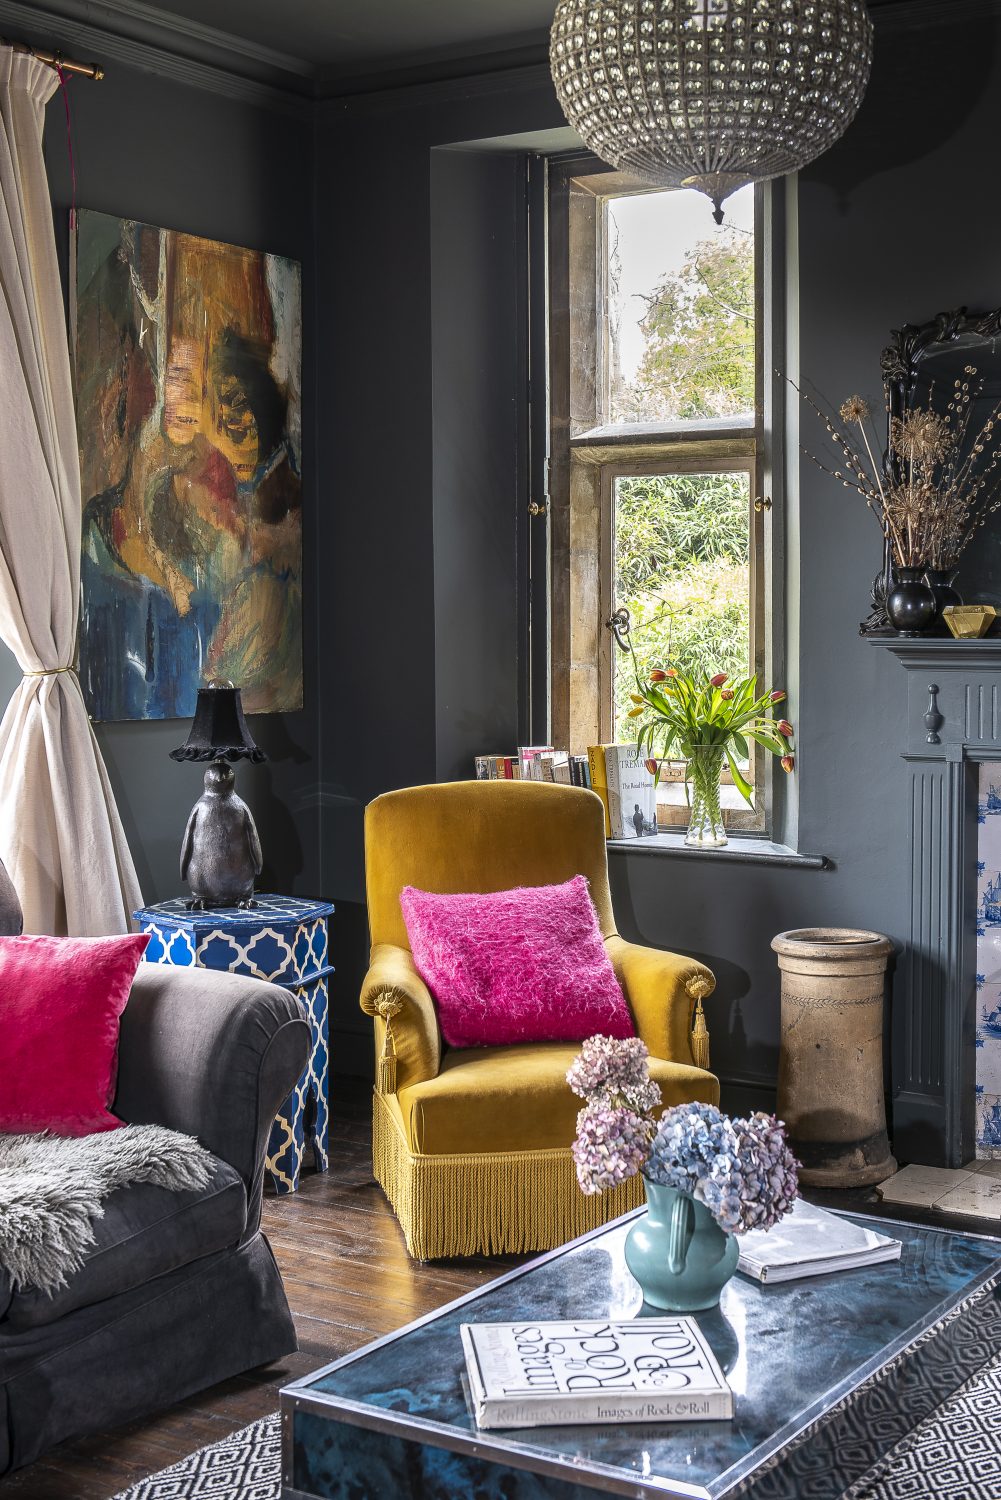 A cosy sitting room, used as a games room, features the original Delft tiles around the fireplace and stone-mullioned windows; opposite the fireplace, a refectory table provides the perfect place to set up a Monopoly board